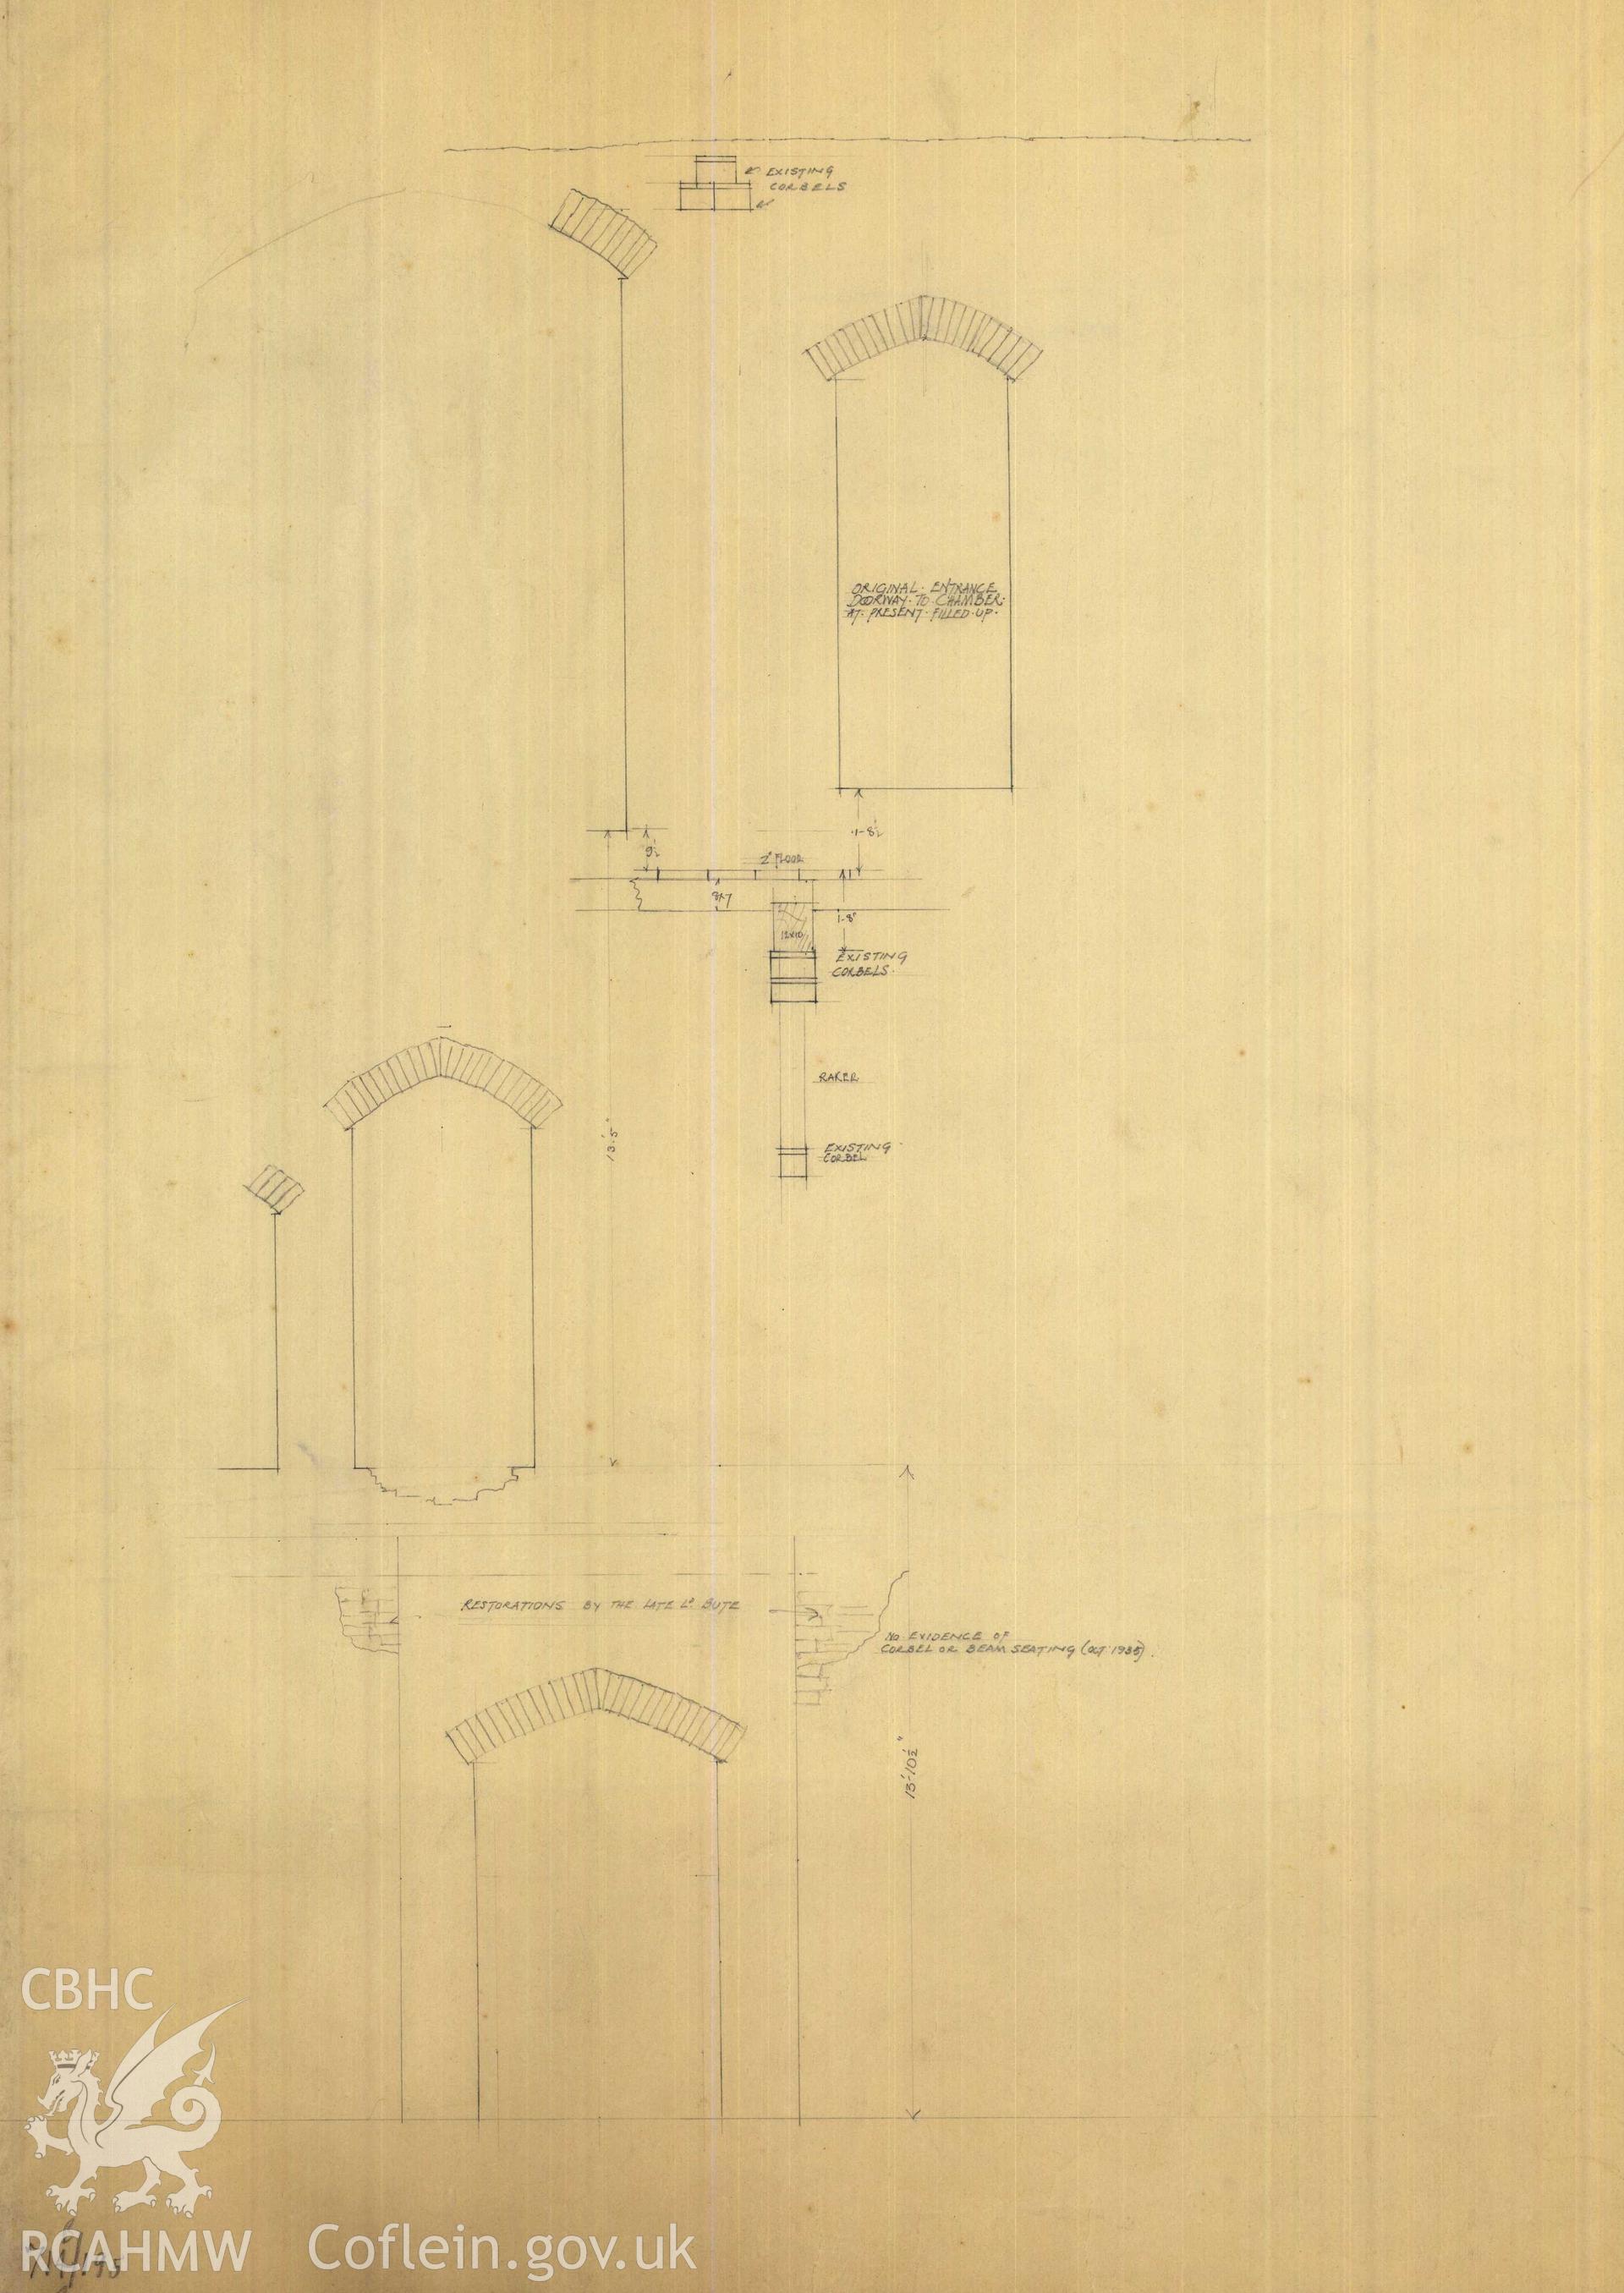 Cadw guardianship monument drawing of Caerphilly Castle. Some tower elevations. Cadw Ref. No:714B/195. Scale 1:24.